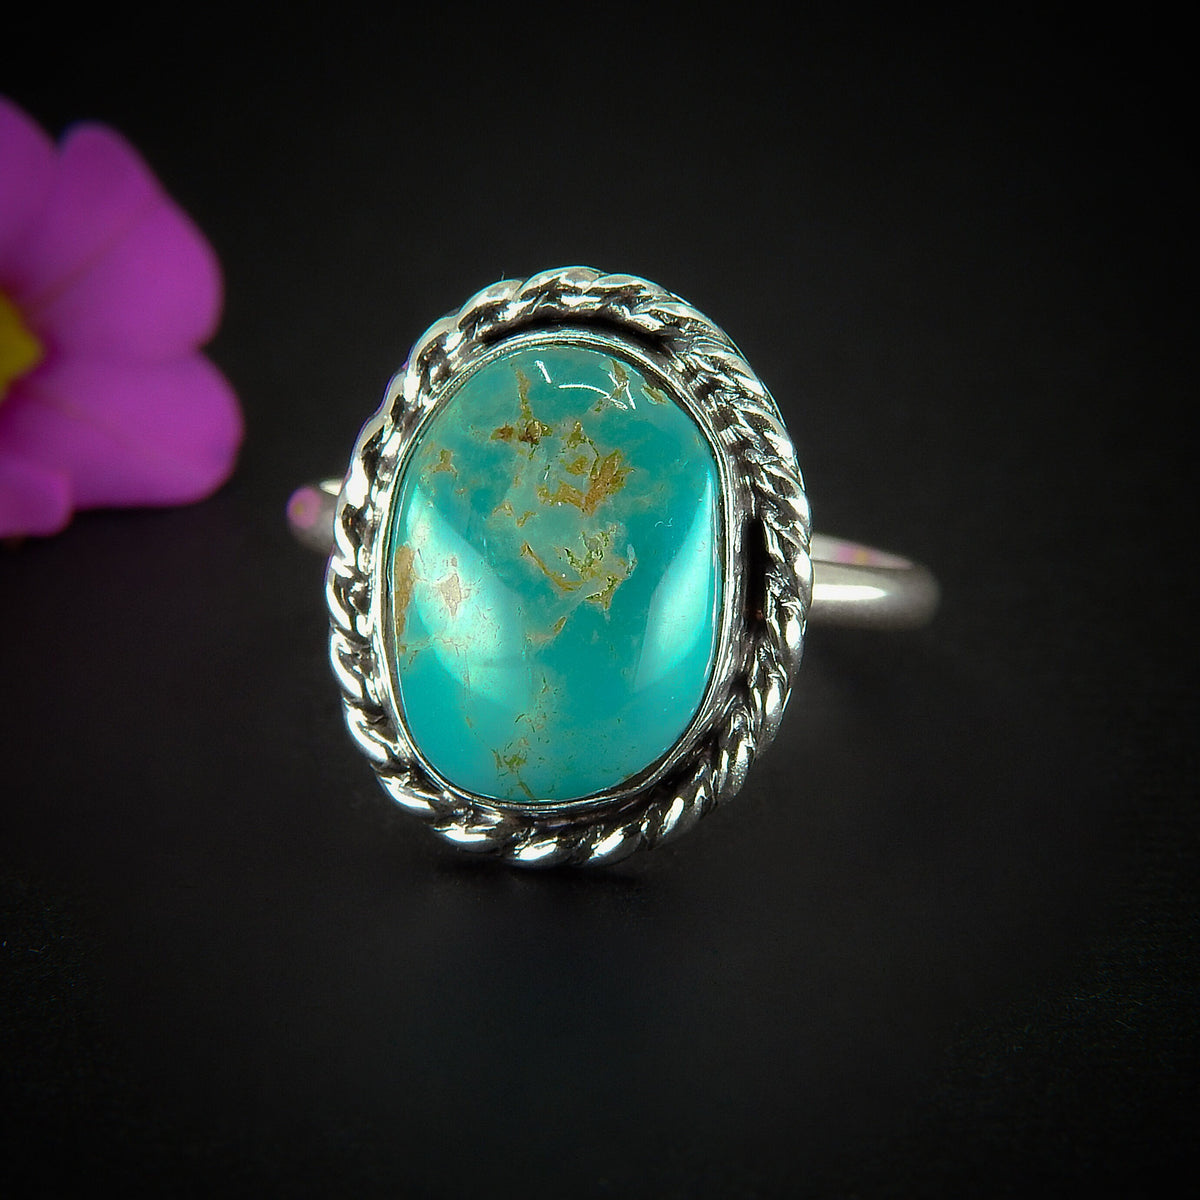 Royston Turquoise Ring - Size 11 1/2 to 11 3/4 - Sterling Silver - Aqua Turquoise Jewellery - Genuine Teal Turquoise Statement Ring OOAK